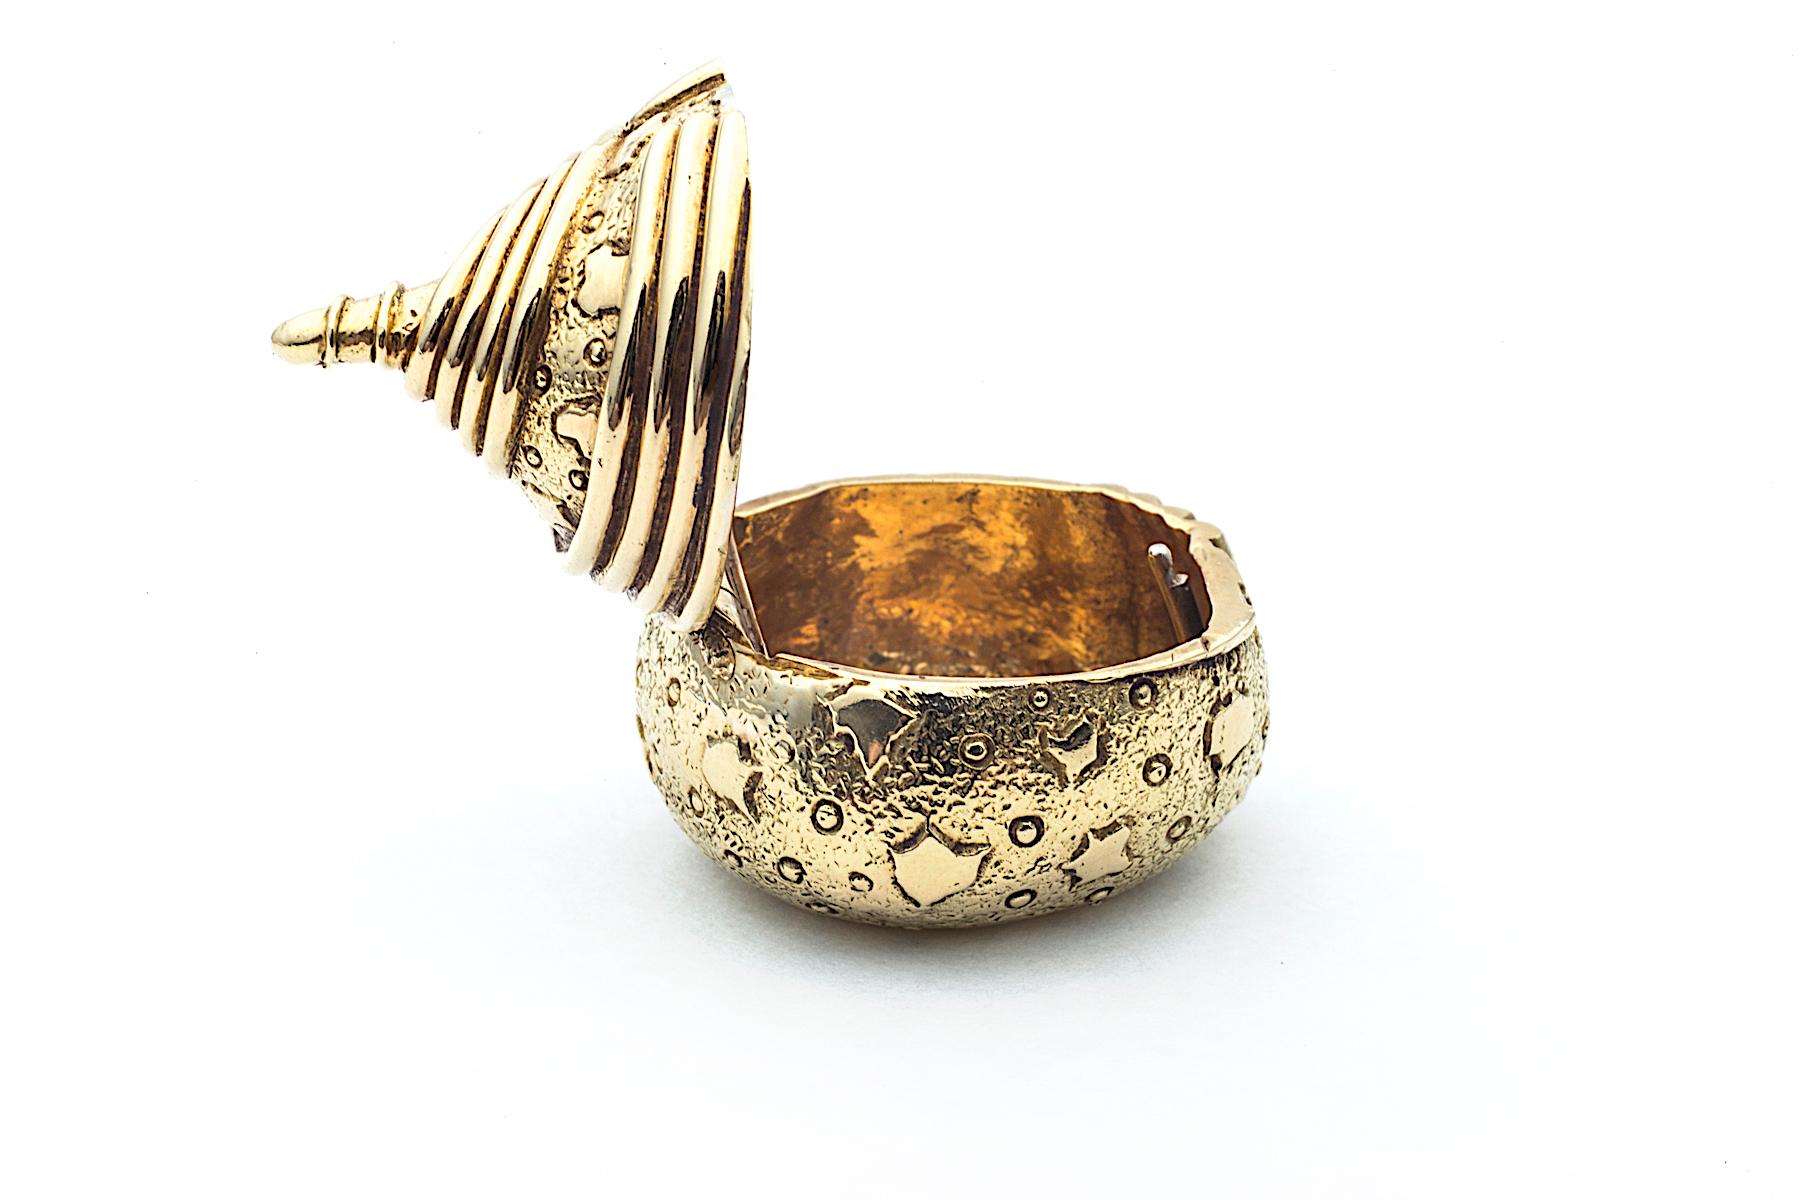 This vintage Jean Schlumberger for Tiffany & Co. decorated golden acorn pill box will quickly become your most coveted accessory.  With a hinged top, this small but precious collectible can hide a tiny treasure and stand guard on your night table or